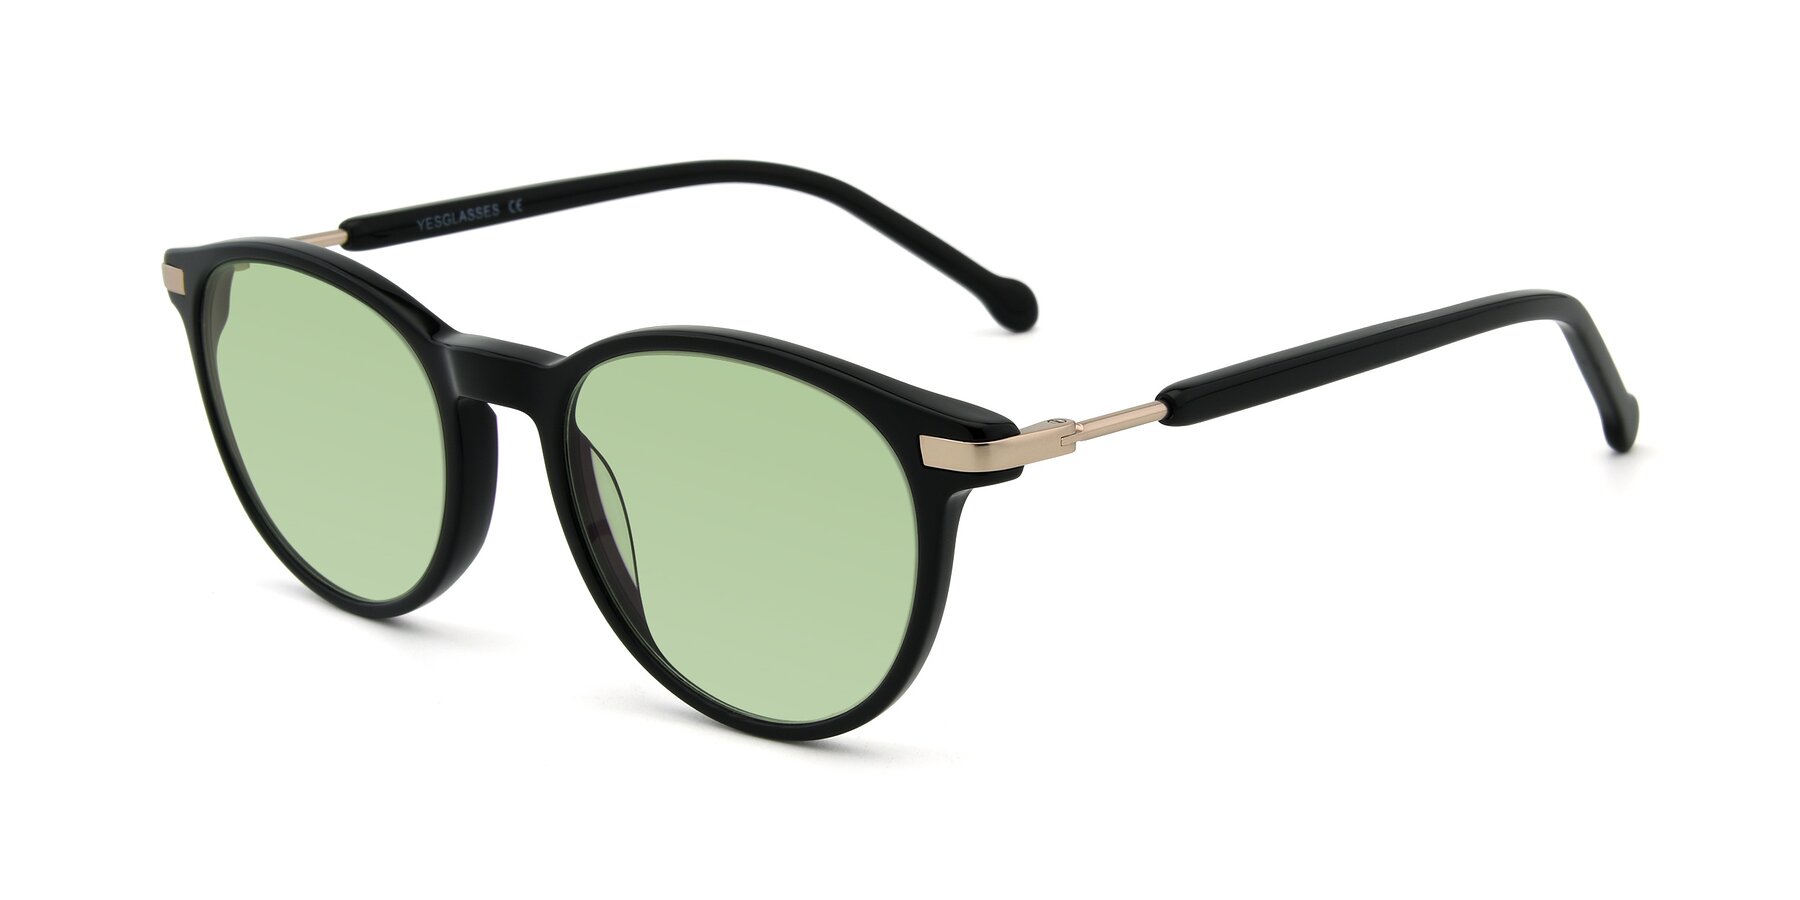 Angle of 17429 in Black with Medium Green Tinted Lenses